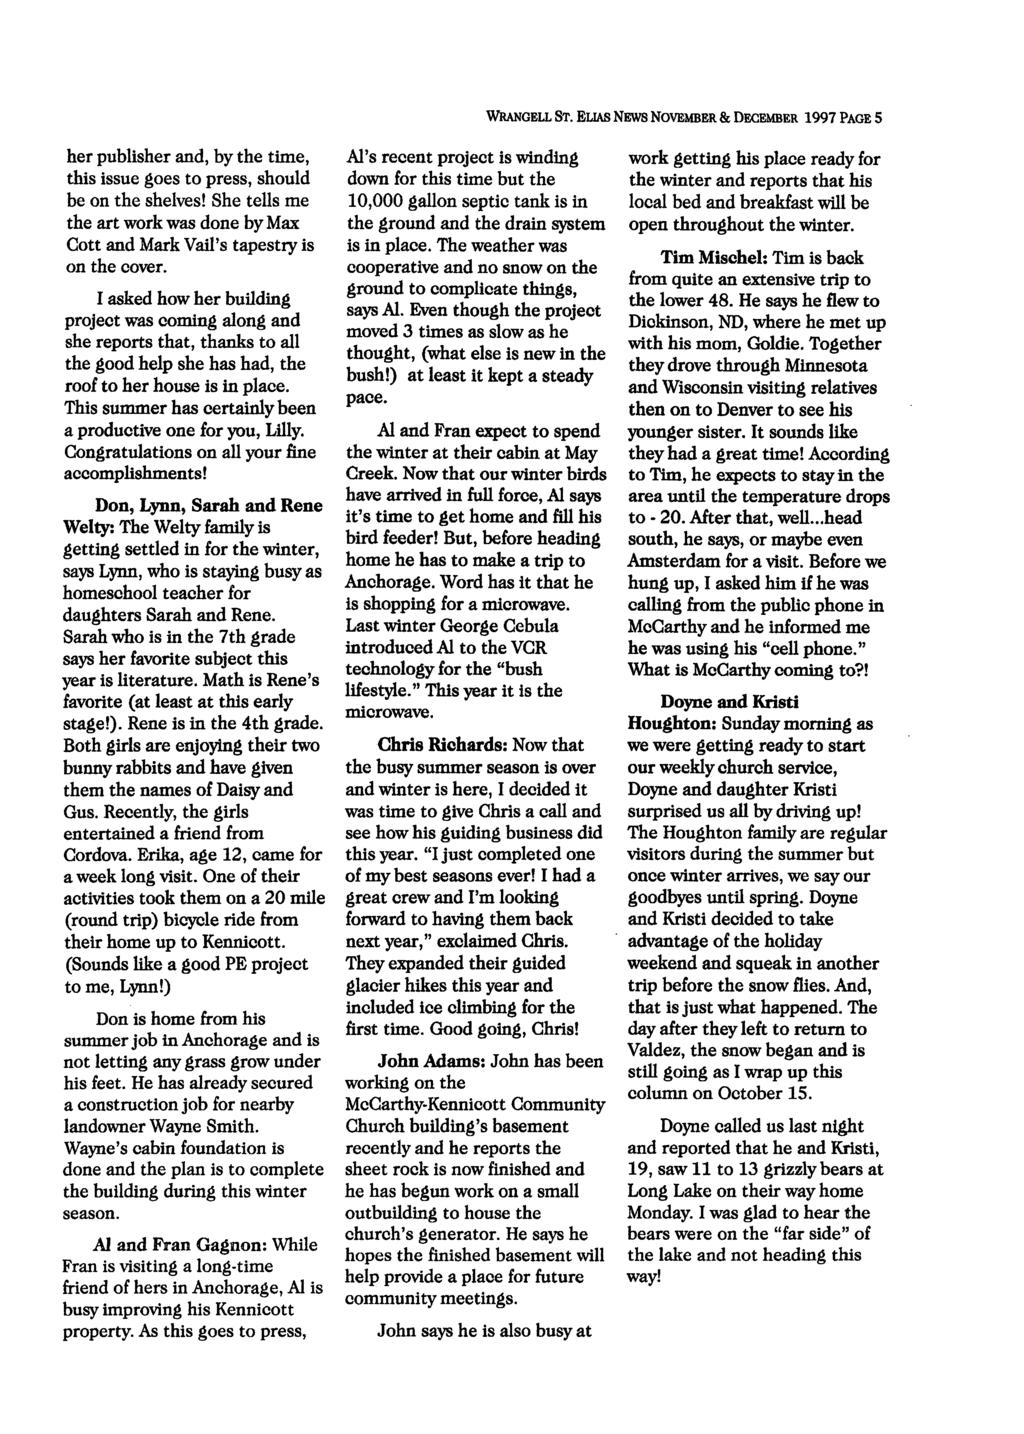 WRANGELL ST. ELIAS NEWS NOVEMBER & DECEMBER 1997 PAGE 5 her publisher and, by the time, this issue goes to press, should be on the shelves!